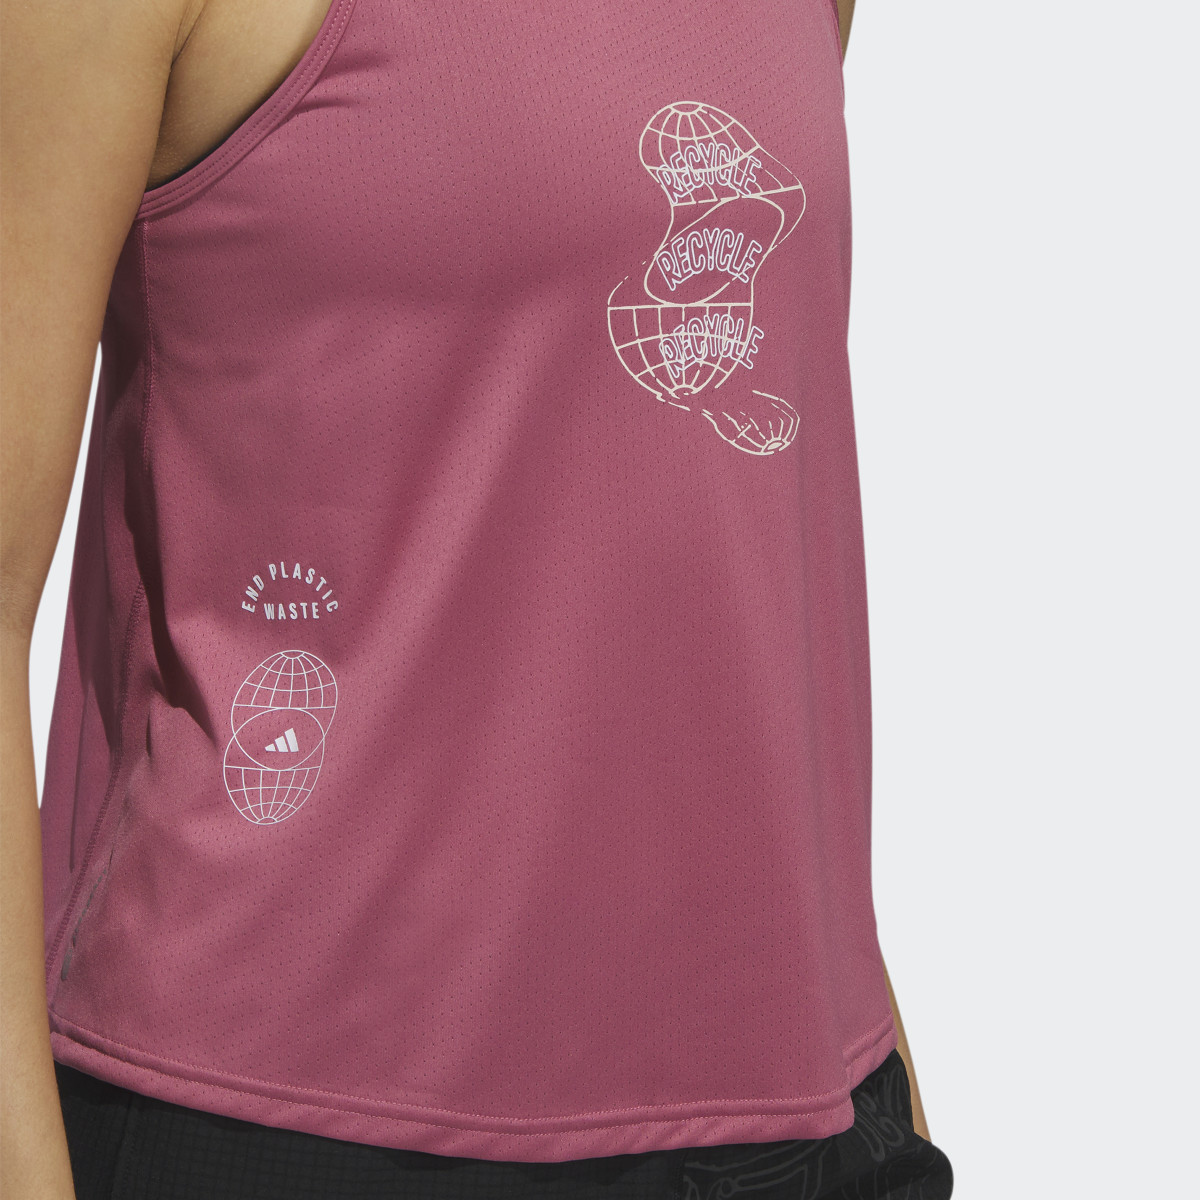 Adidas Run for the Oceans Tank Top. 7